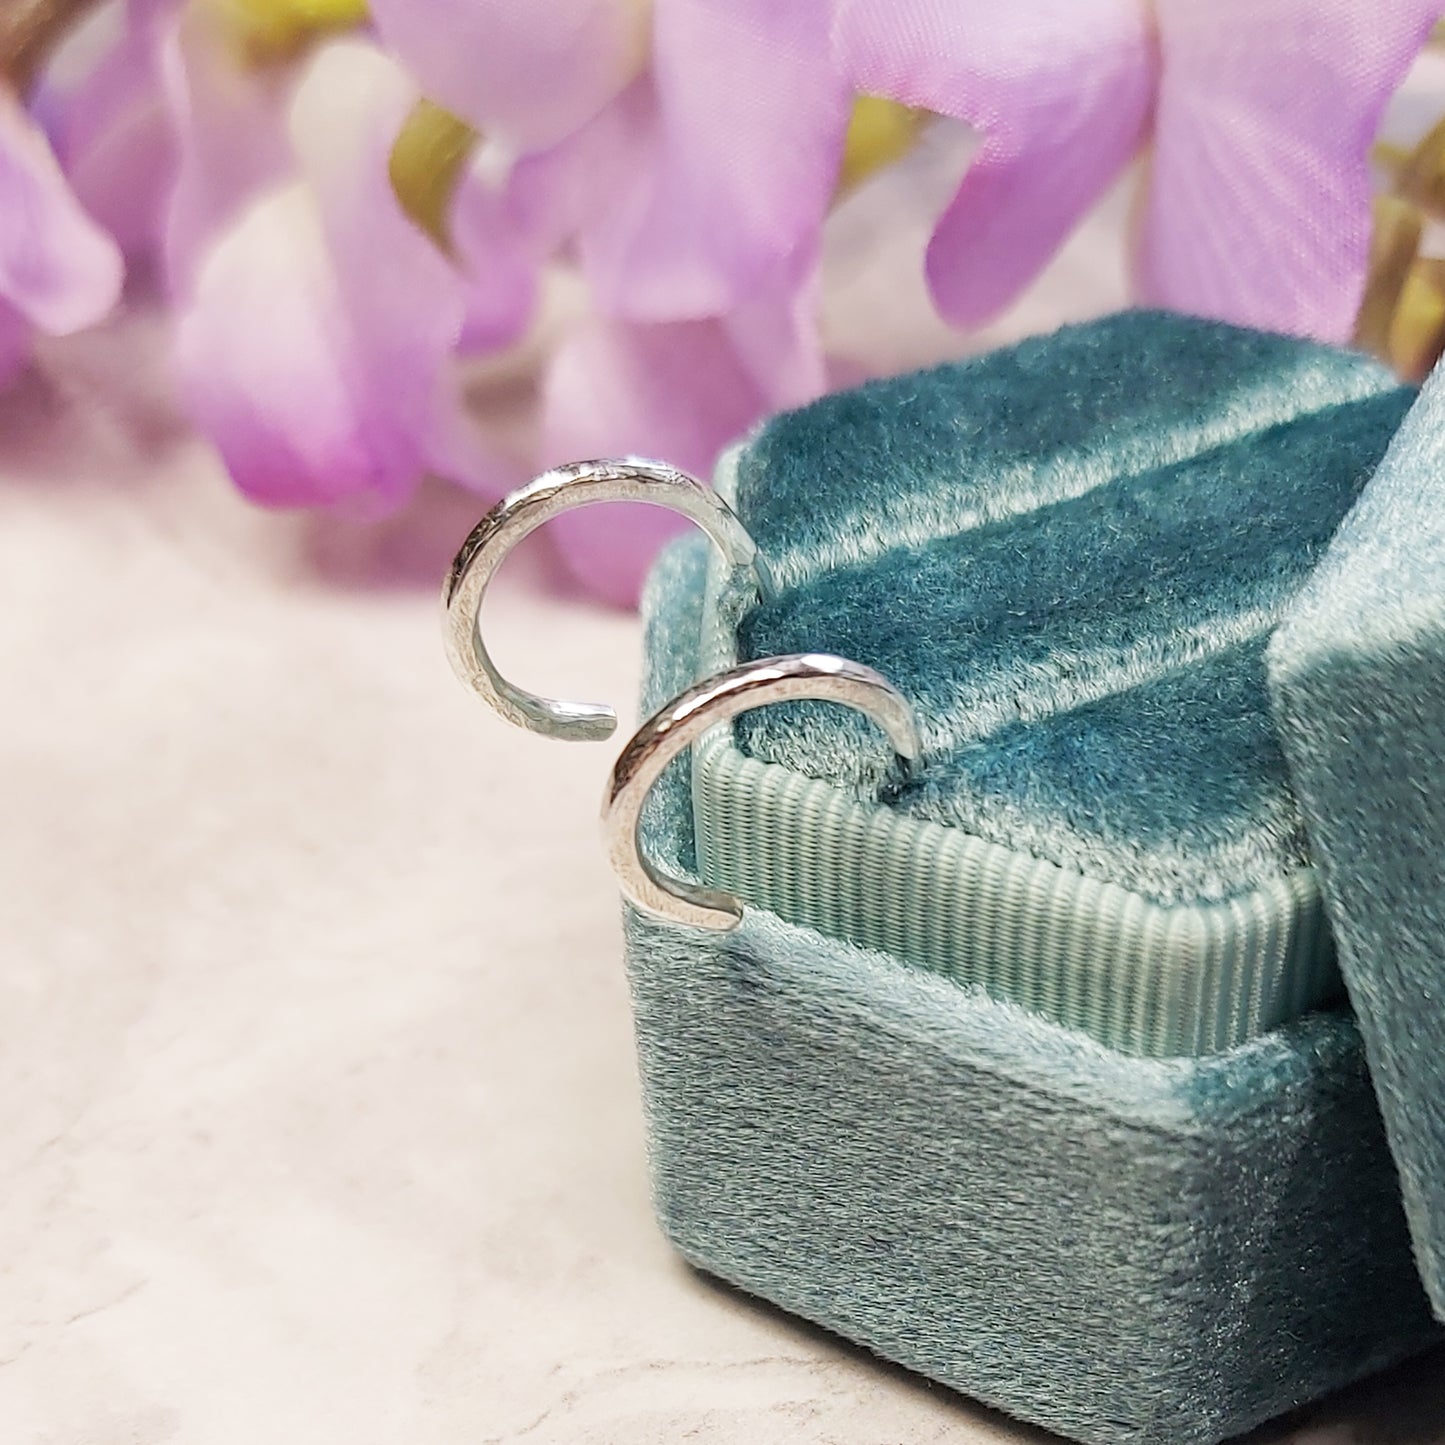 Silver thin hammered hoop earrings - small. Shown pictured in a jewellery box with flowers.